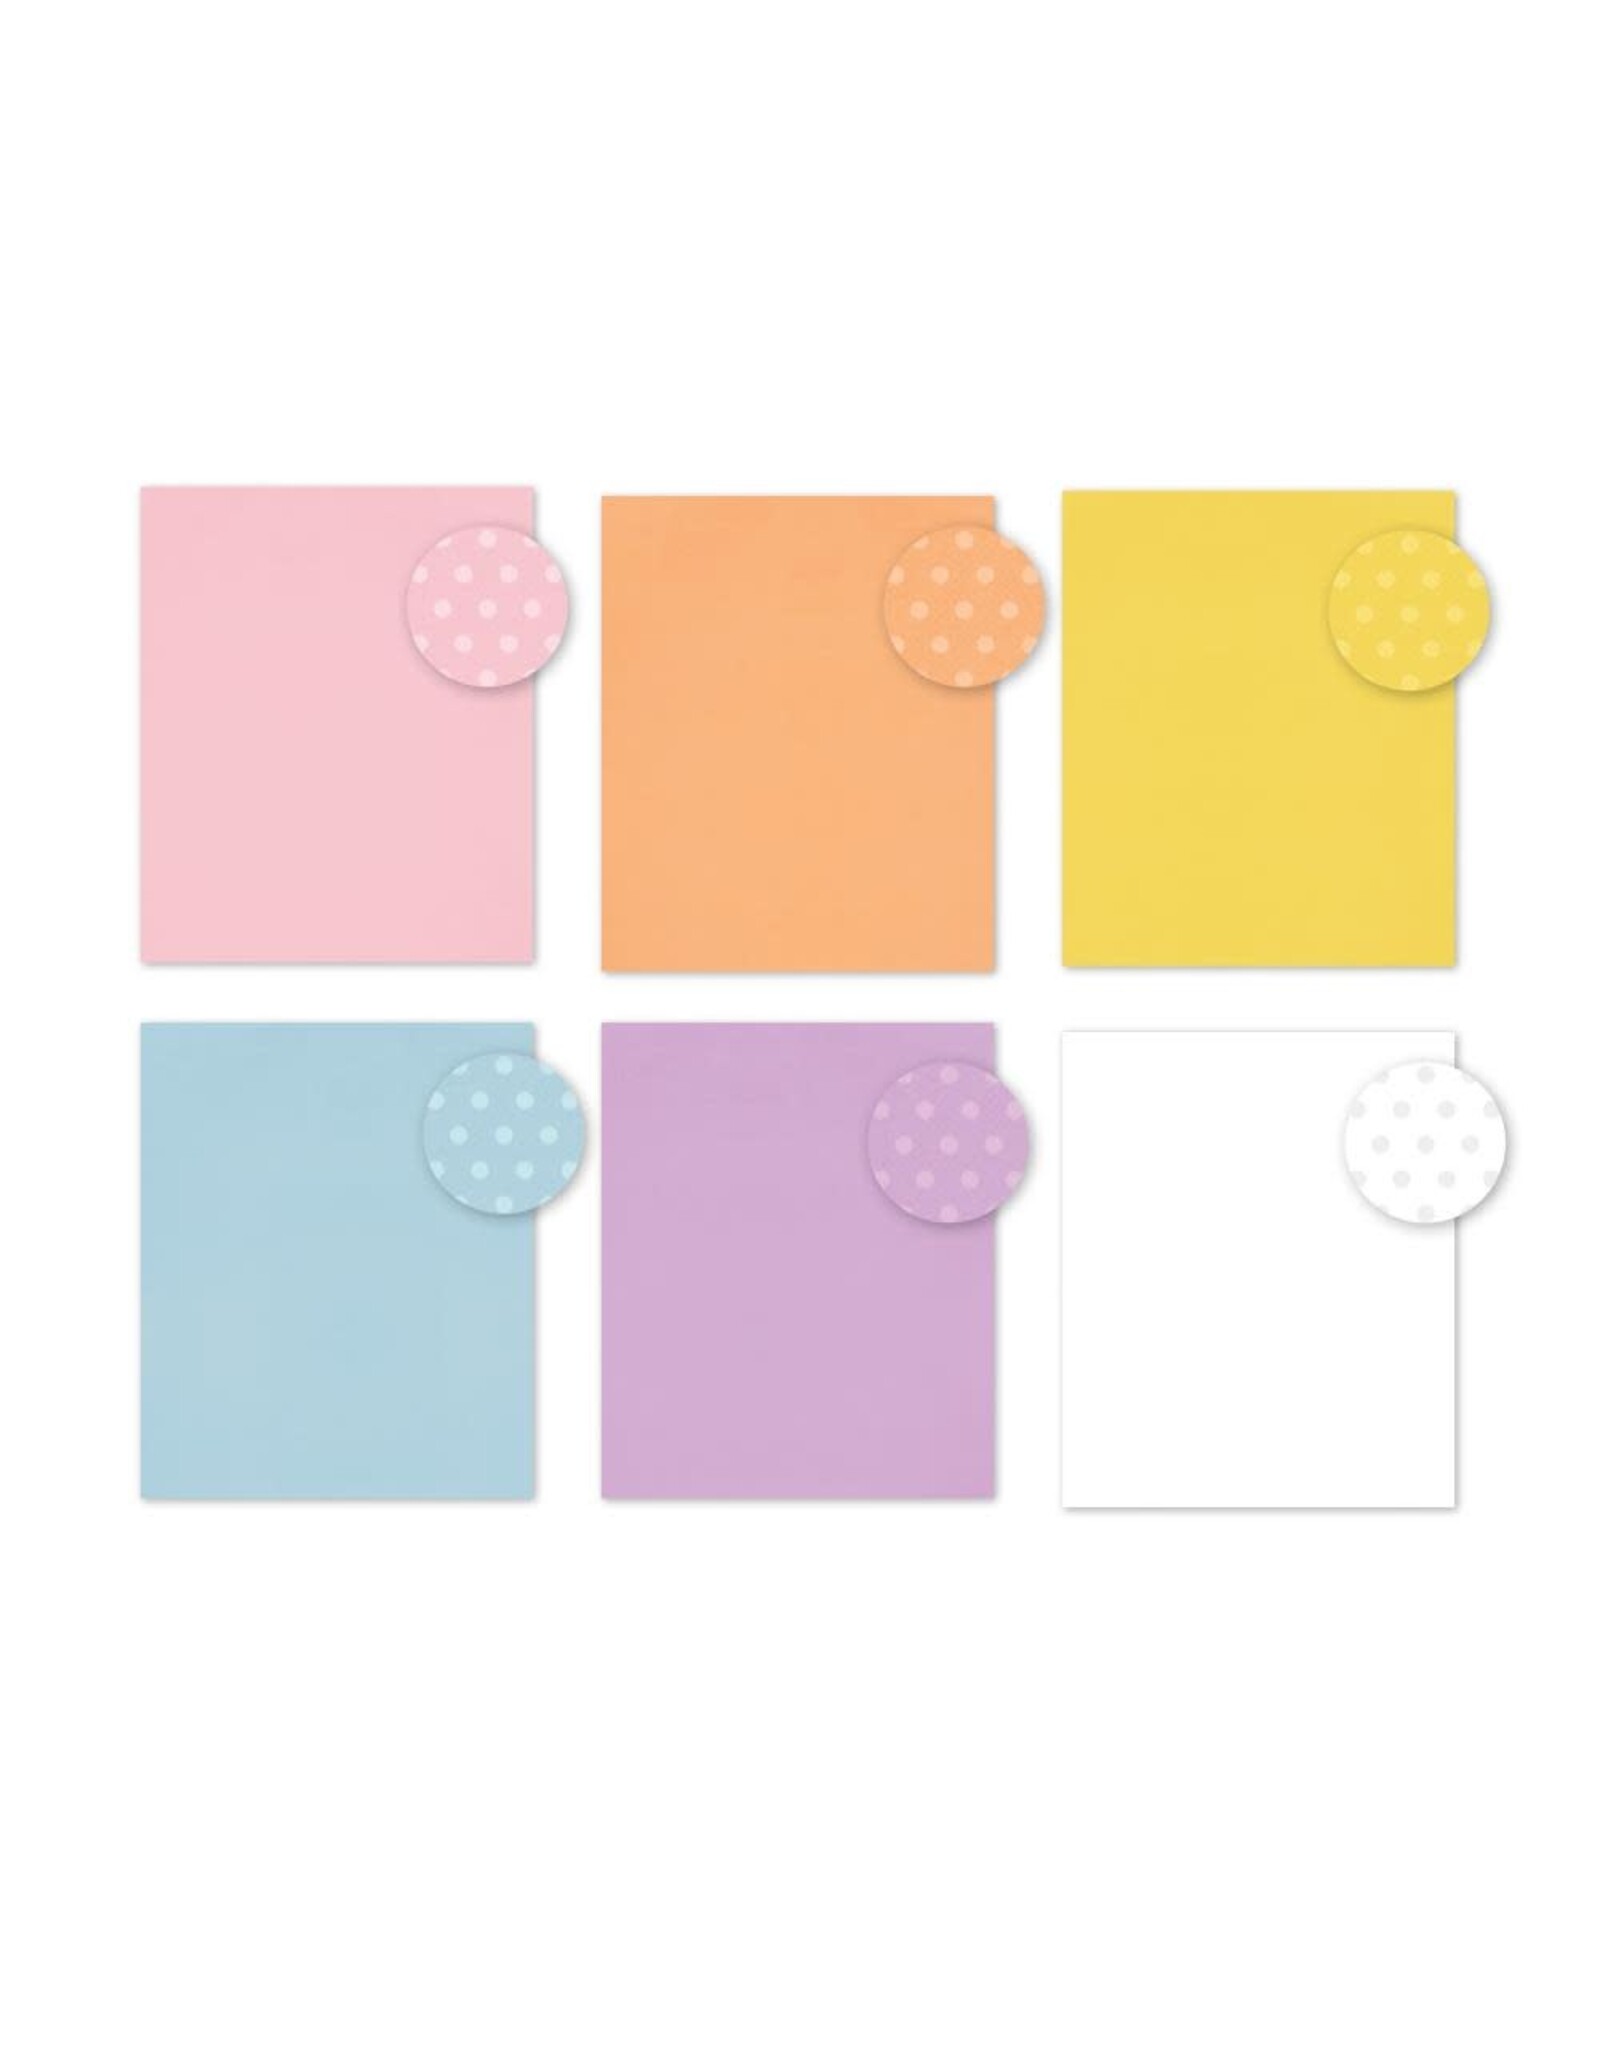 SIMPLE STORIES SIMPLE STORIES COLOR VIBE - SPRING 6x8 PAPER PAD 24 SHEETS